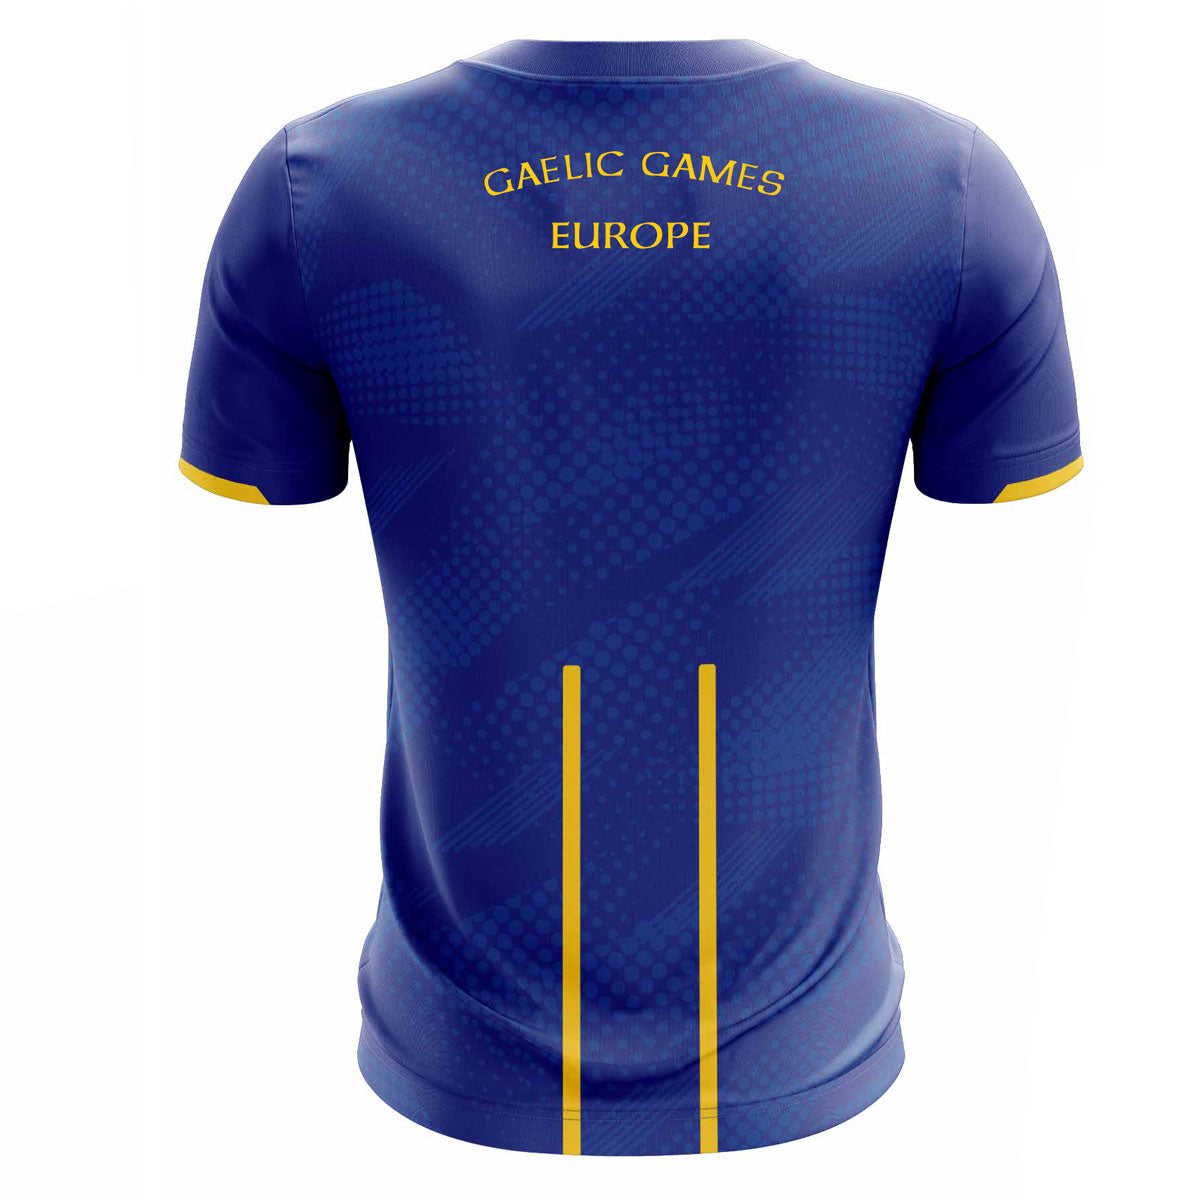 Mc Keever Gaelic Games Europe Playing Jersey - Adult - Royal